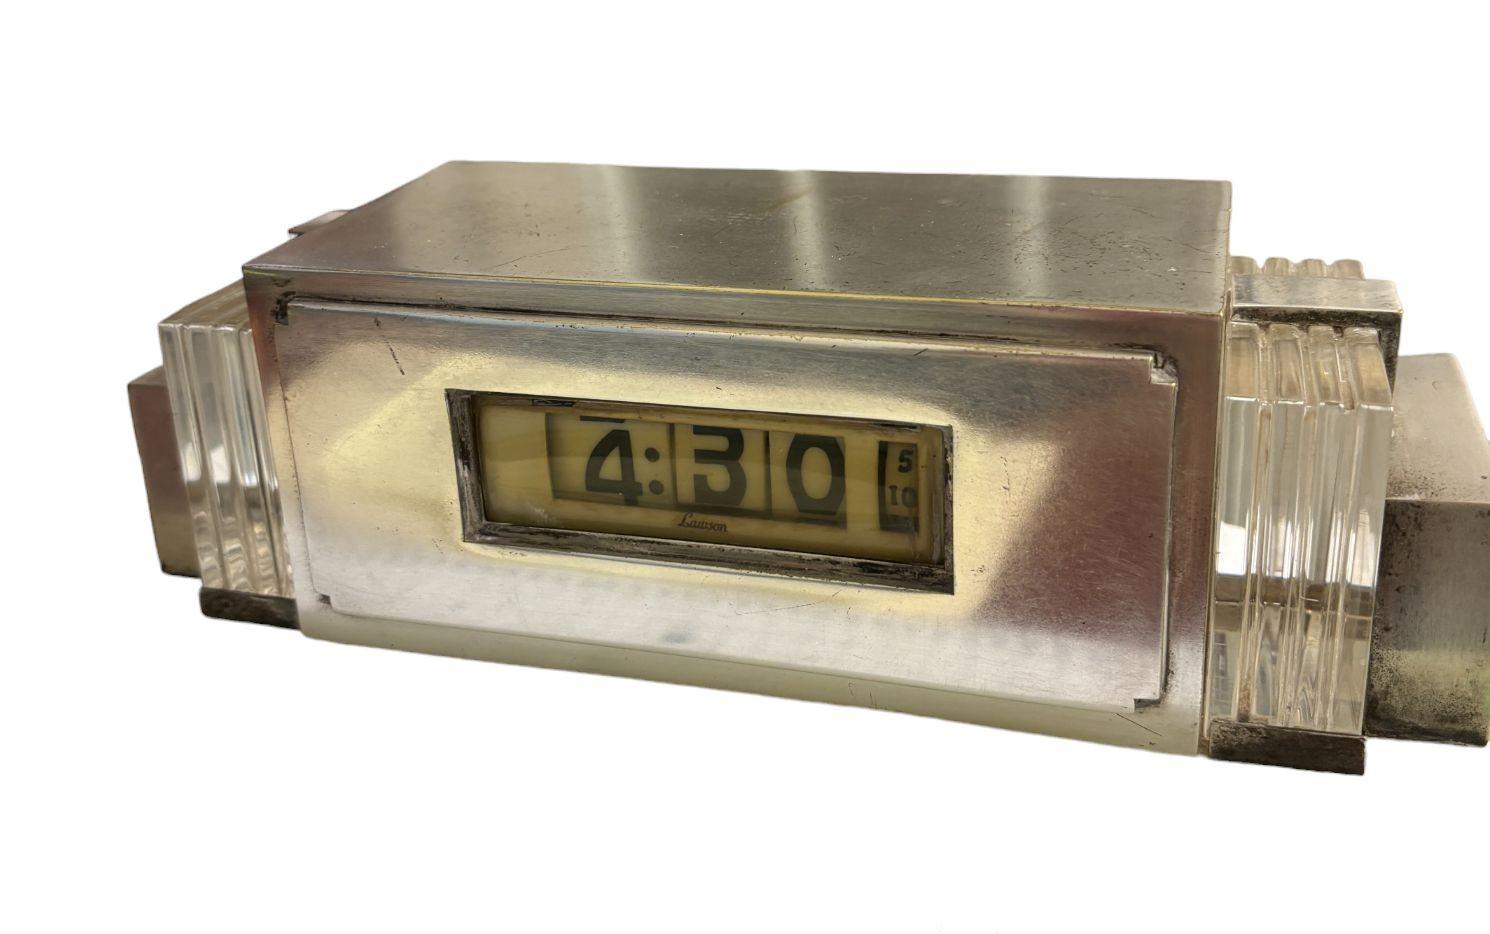 Mid-20th Century Art Deco Silver and Marble Digital Mantel Clock Model 975 by Lawson, Circa 1930 For Sale